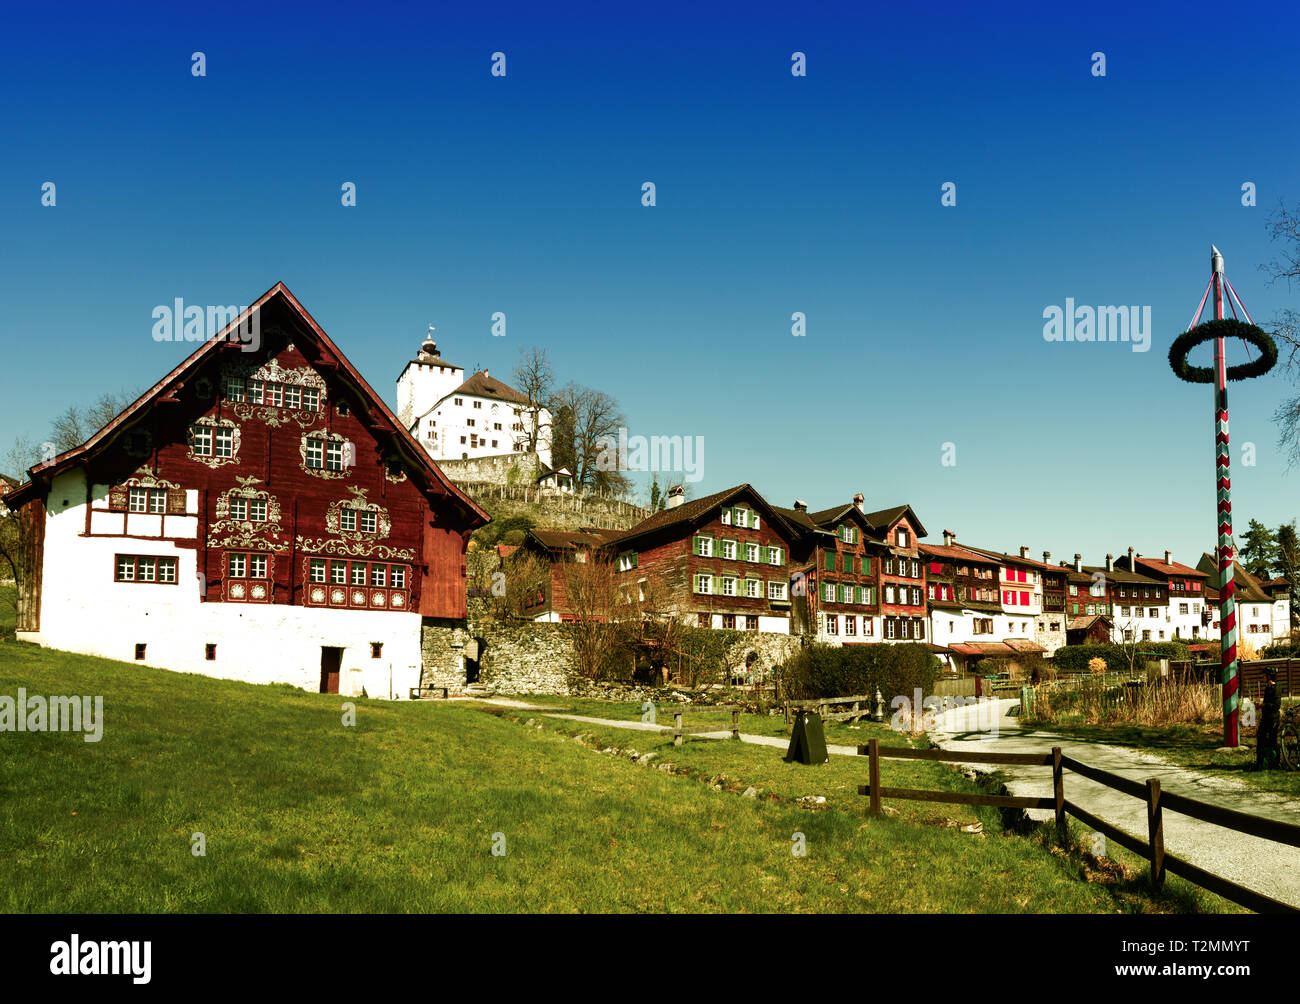 Werdenberg, SG / Switzerland - March 31, 2019: historic Werdenberg village and castle with traditional Burgher homes with wall art and painting Stock Photo